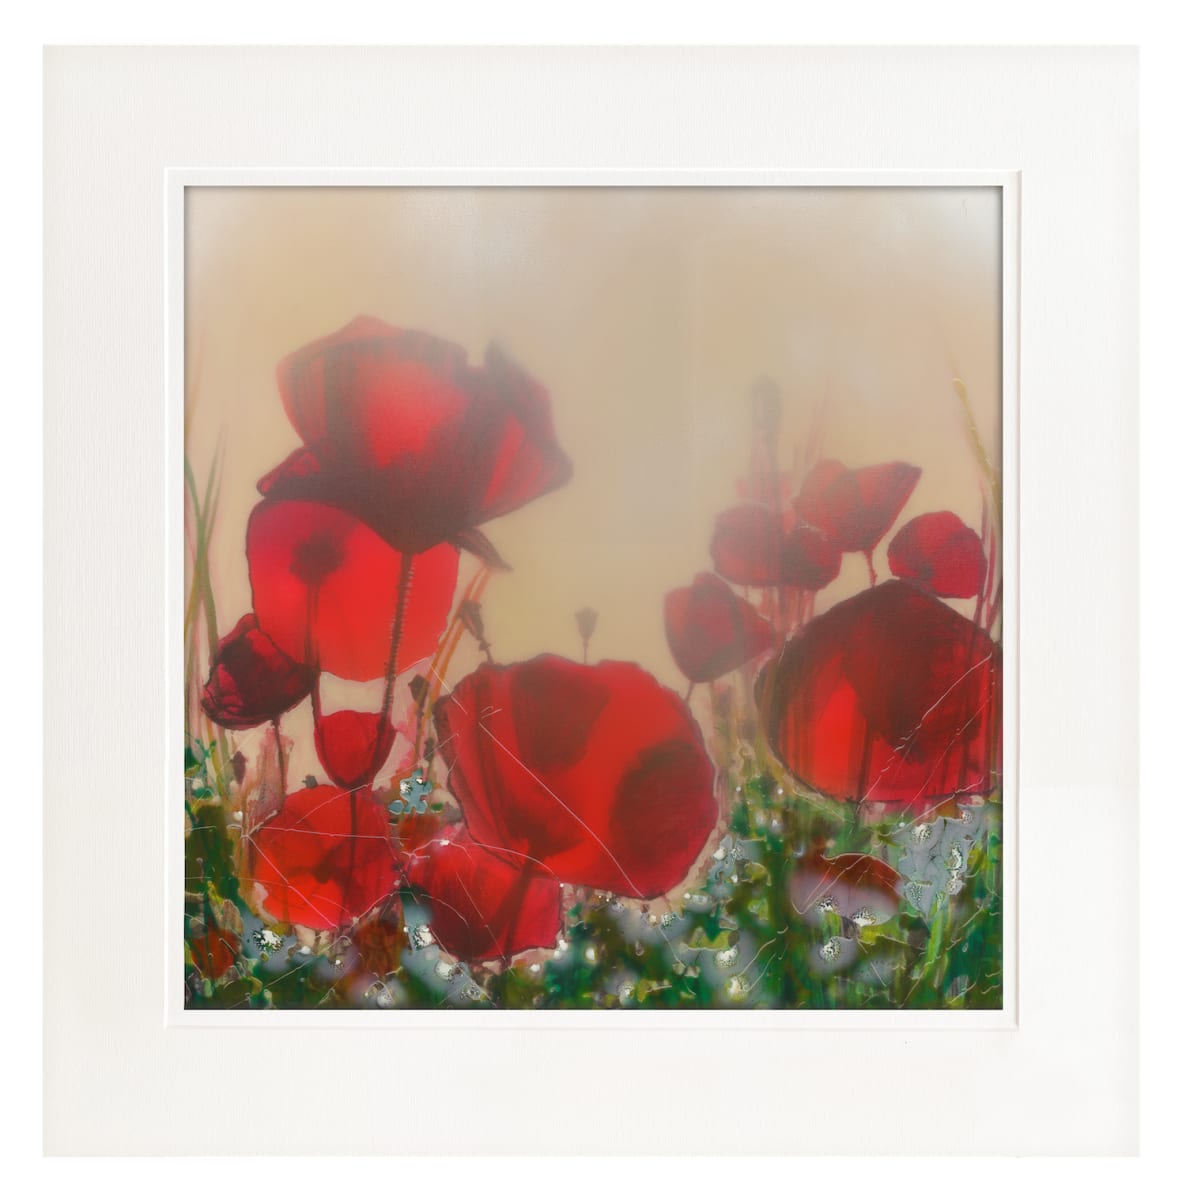 Wall art prints | Limited Edition Print | Poppy Haze - Signed Limited Edition Print with mount (unframed) - 150 in edition Proof 4 